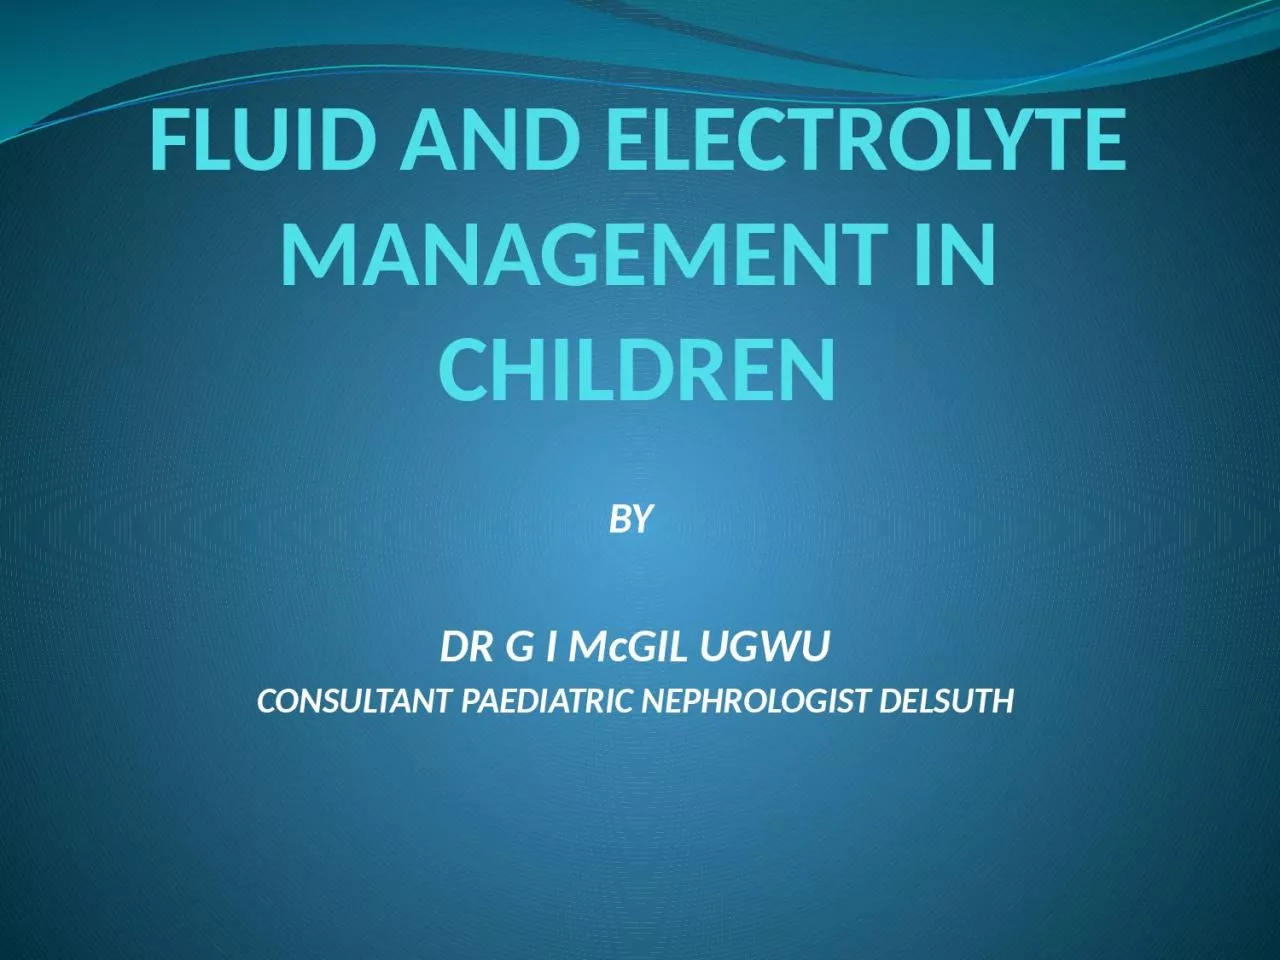 FLUID AND ELECTROLYTE MANAGEMENT IN CHILDREN